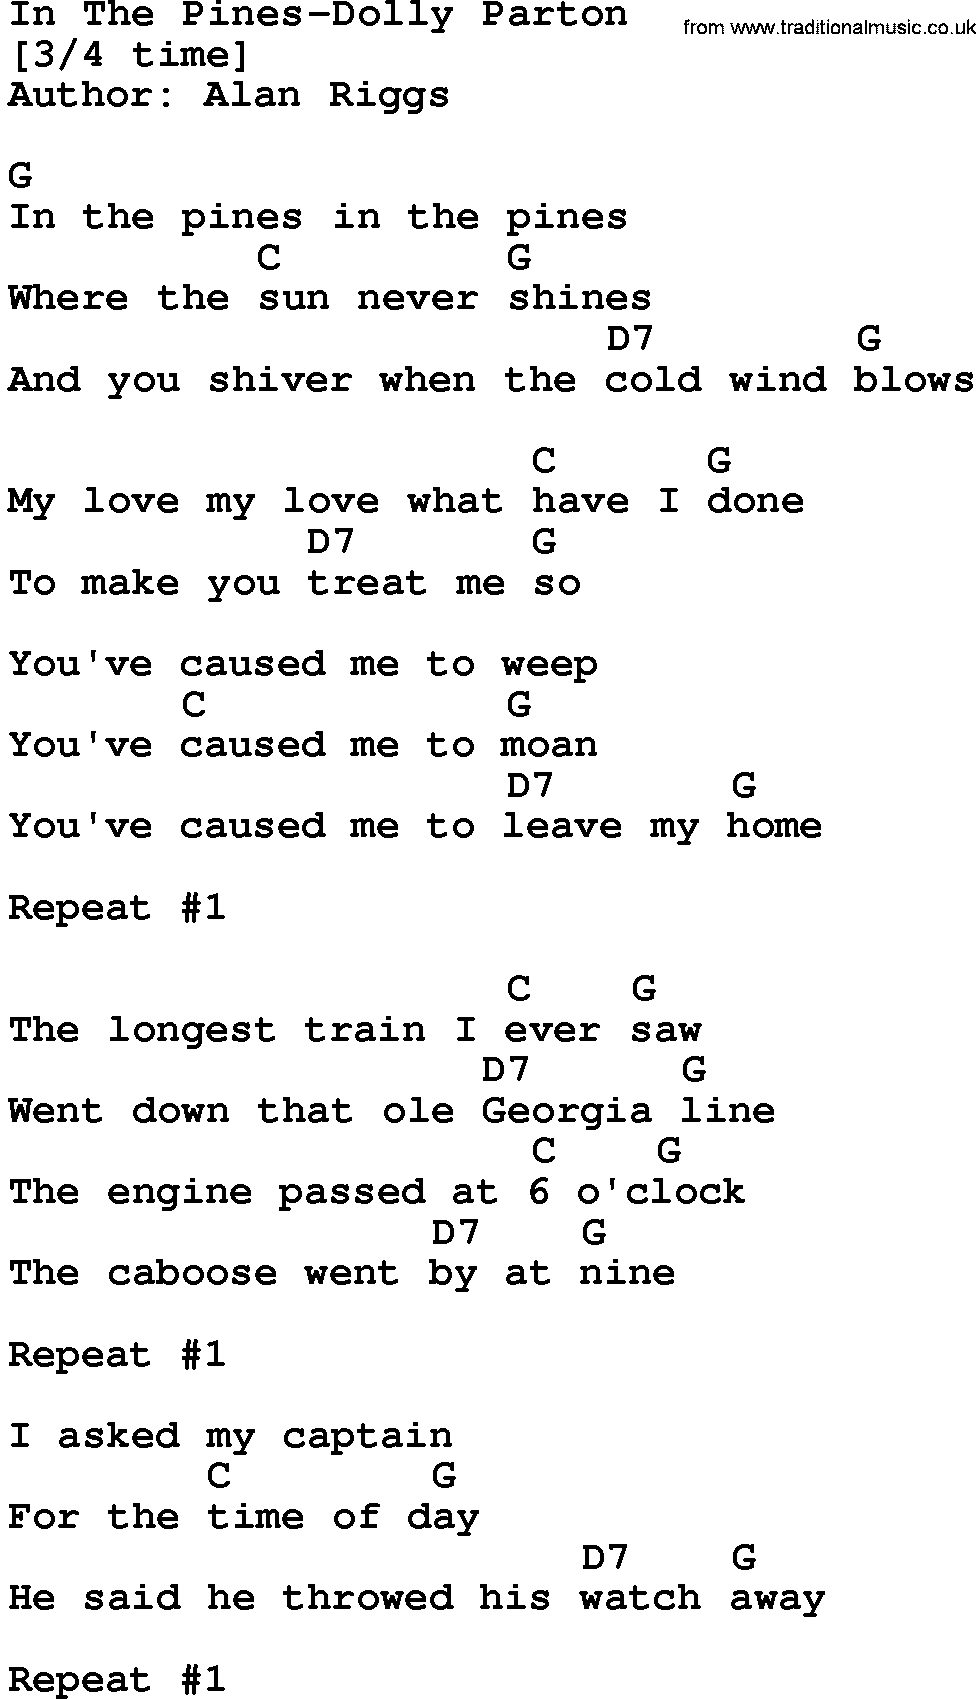 Country music song: In The Pines-Dolly Parton lyrics and chords